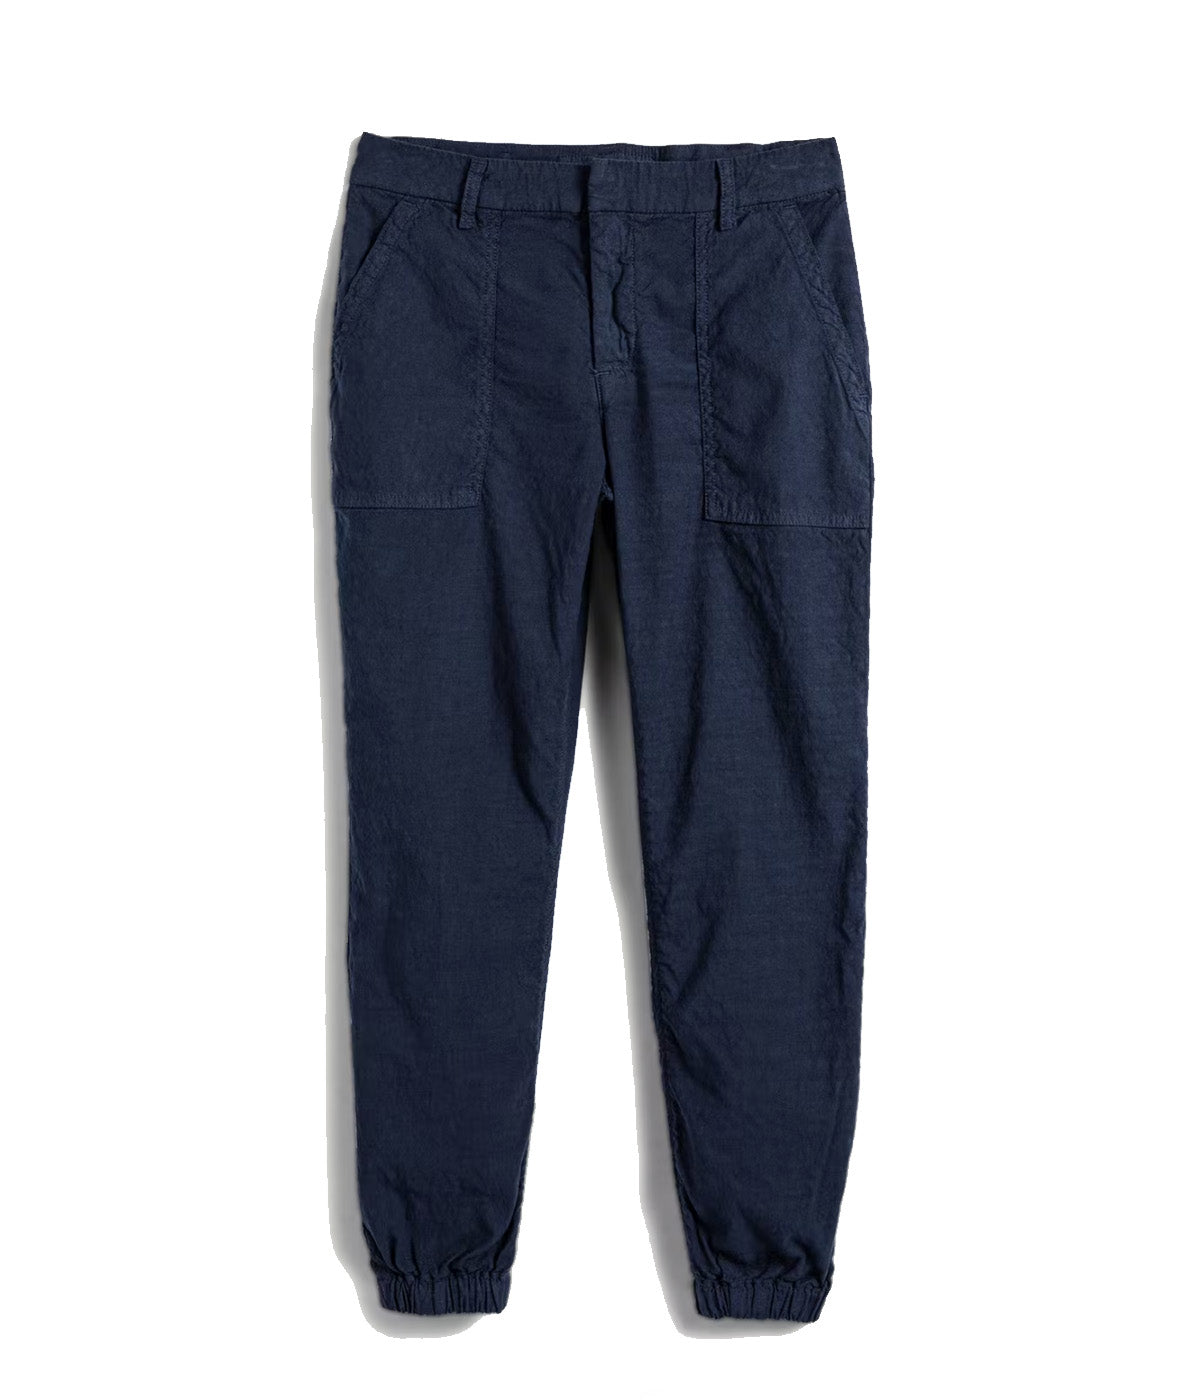 Jameson Jogger Performance in Navy